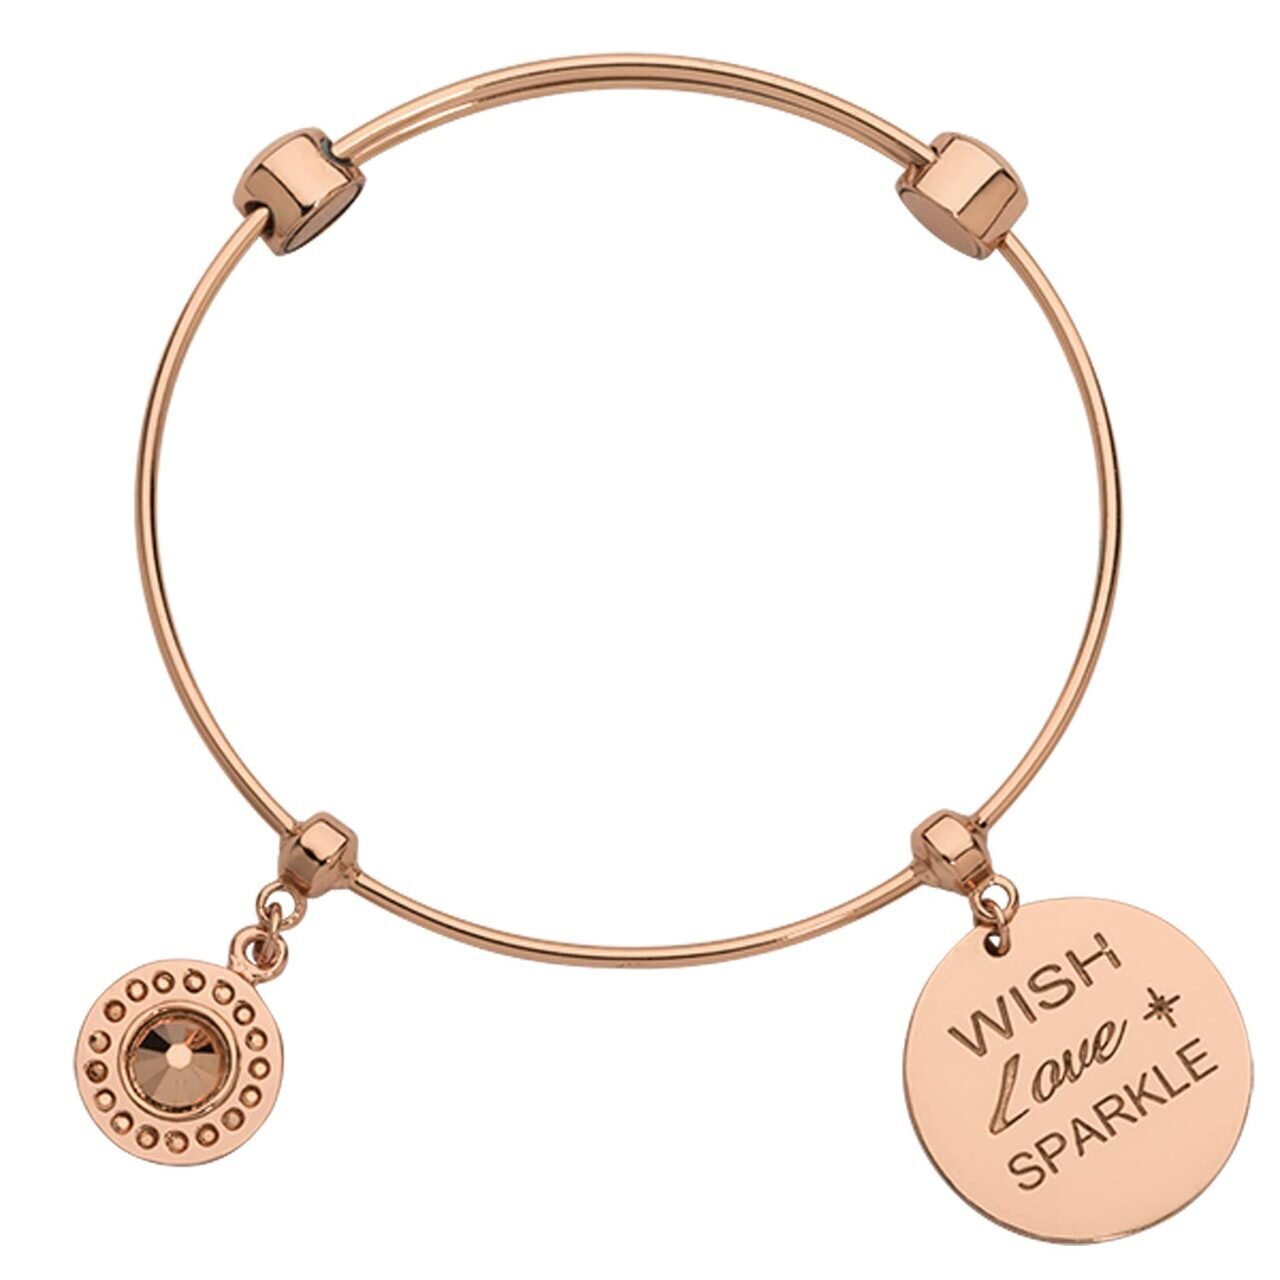 Nikki Lissoni Charm Bangle with Two Fixed Charms Rose Wish Love Sparkle Rose Gold-plated 19cm B1142RG19